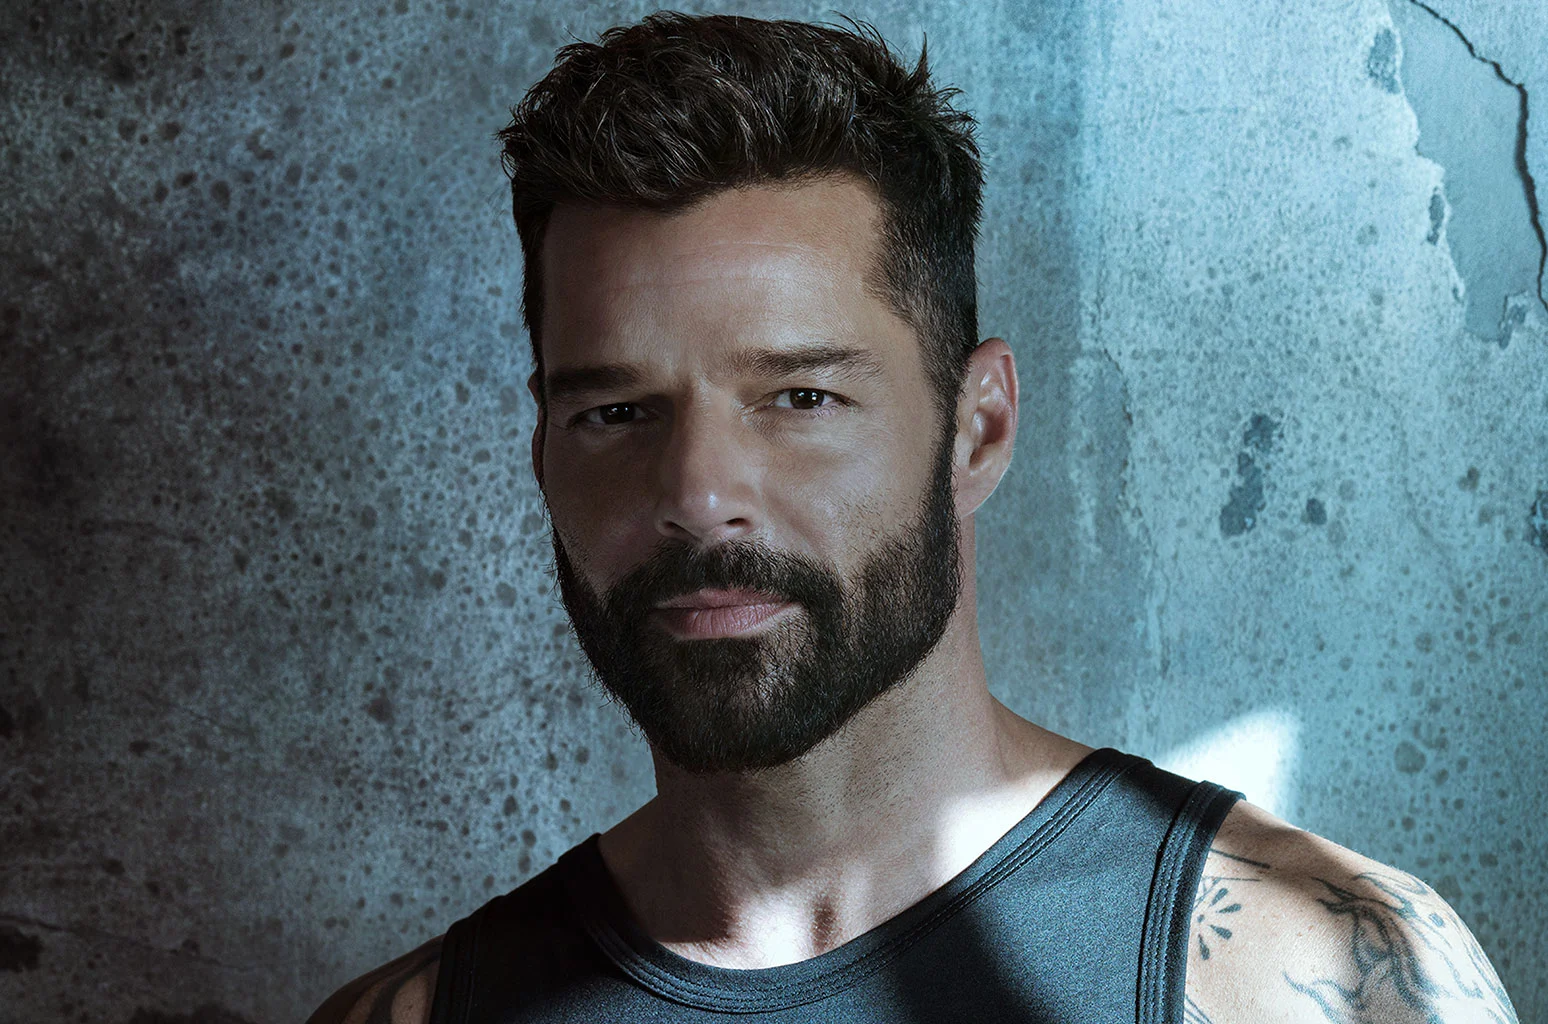 Ricky Martin accused of incest by his nephew